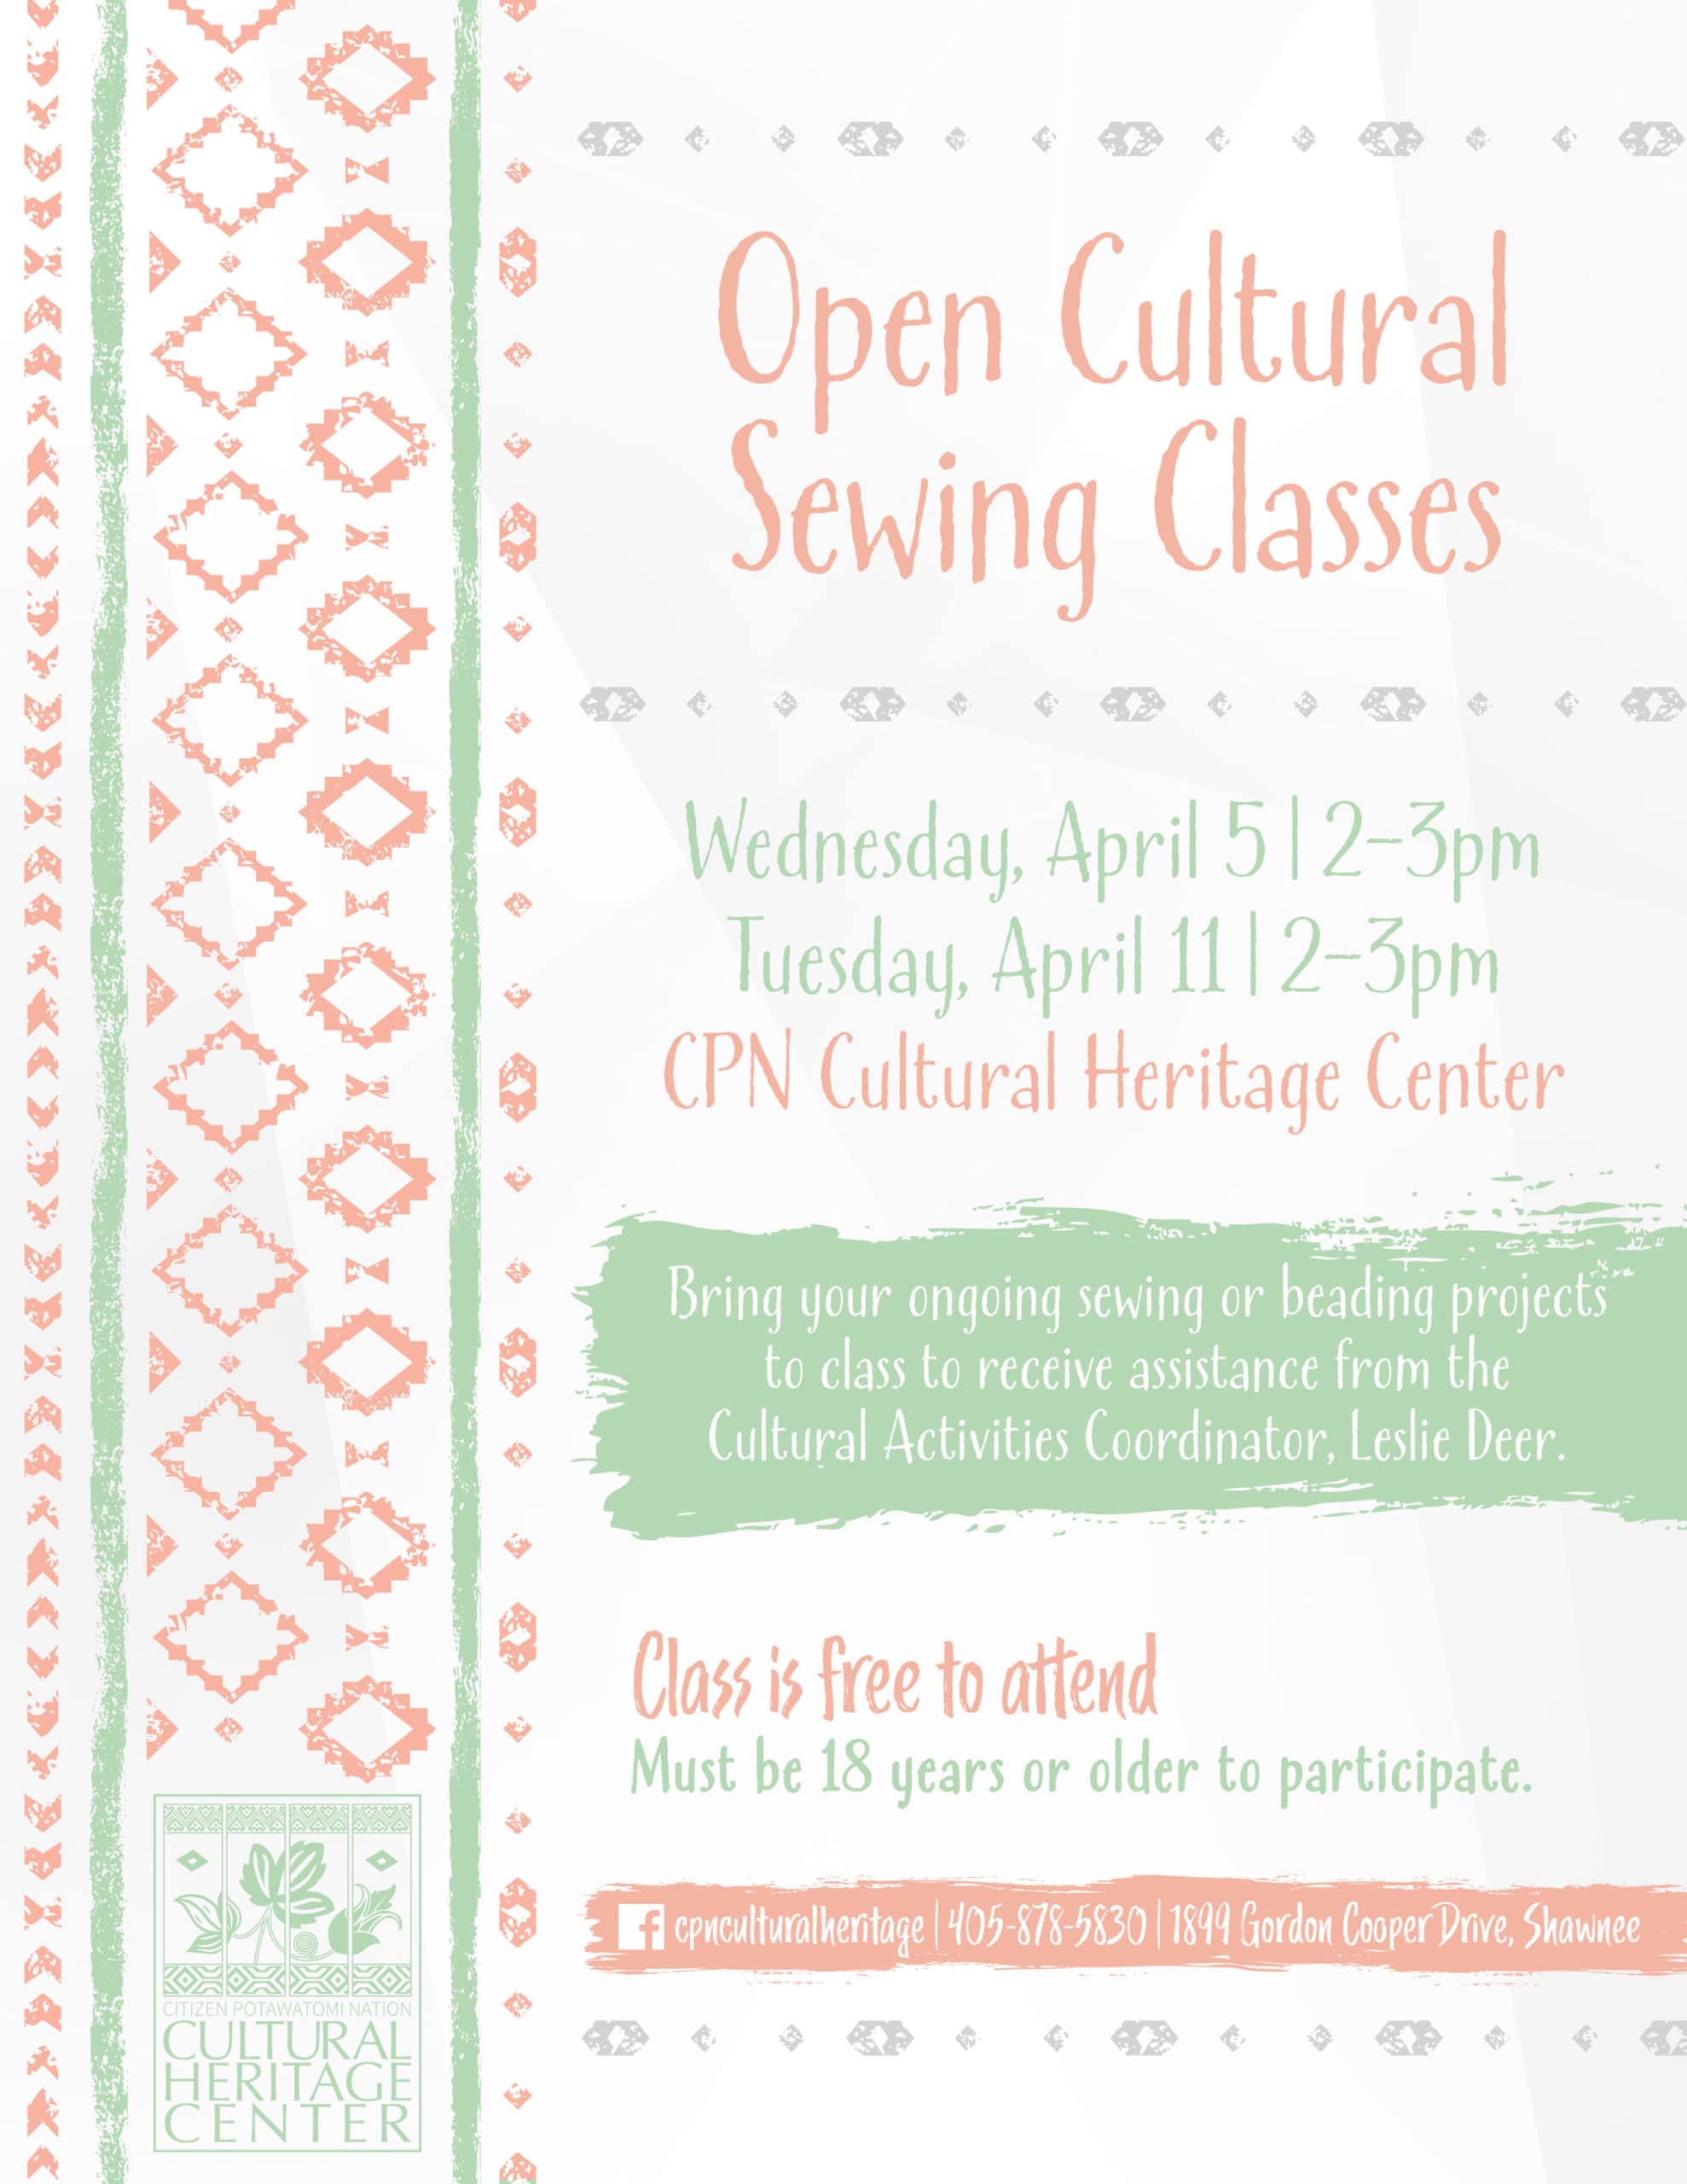 Pink and green geometric designs frame class details for April's "Open Cultural Sewing Classes."